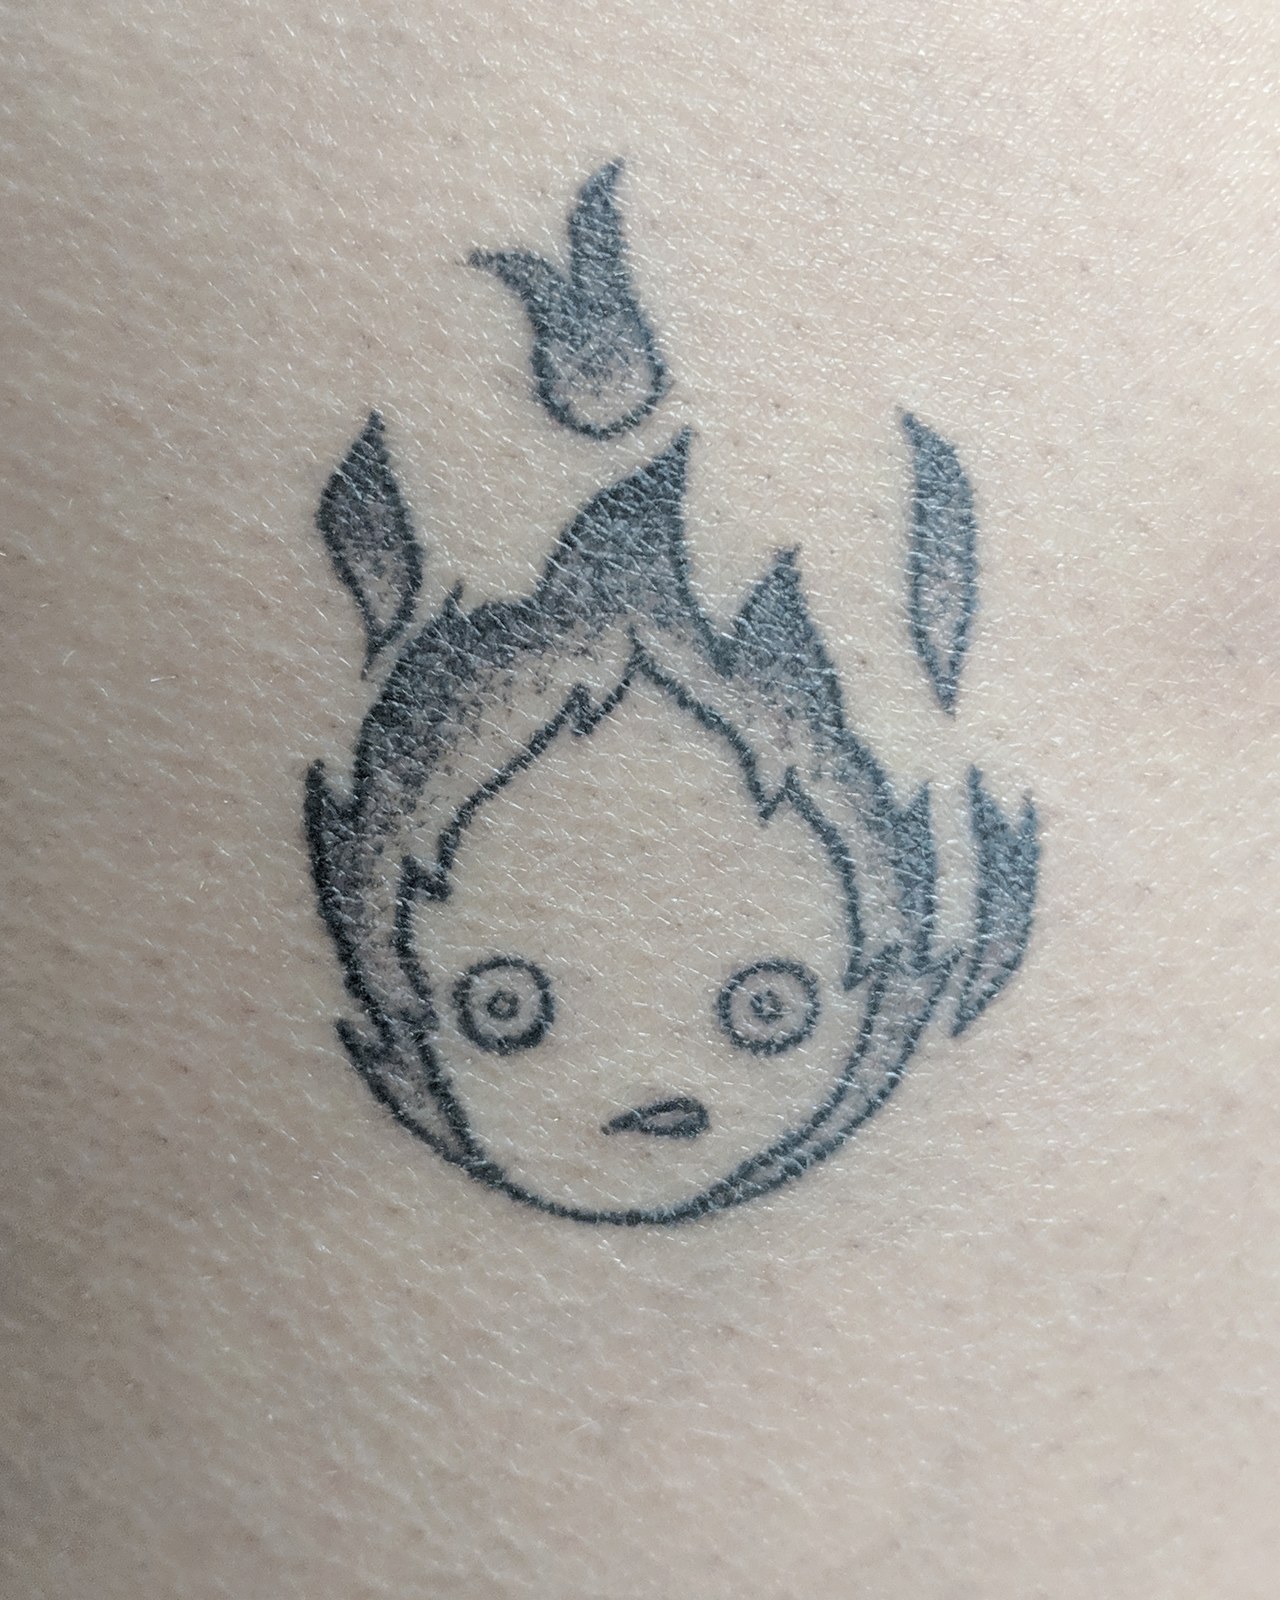 Howl and Calcifer from Howls Moving Castle by mylittleblueforest   Tattoogridnet